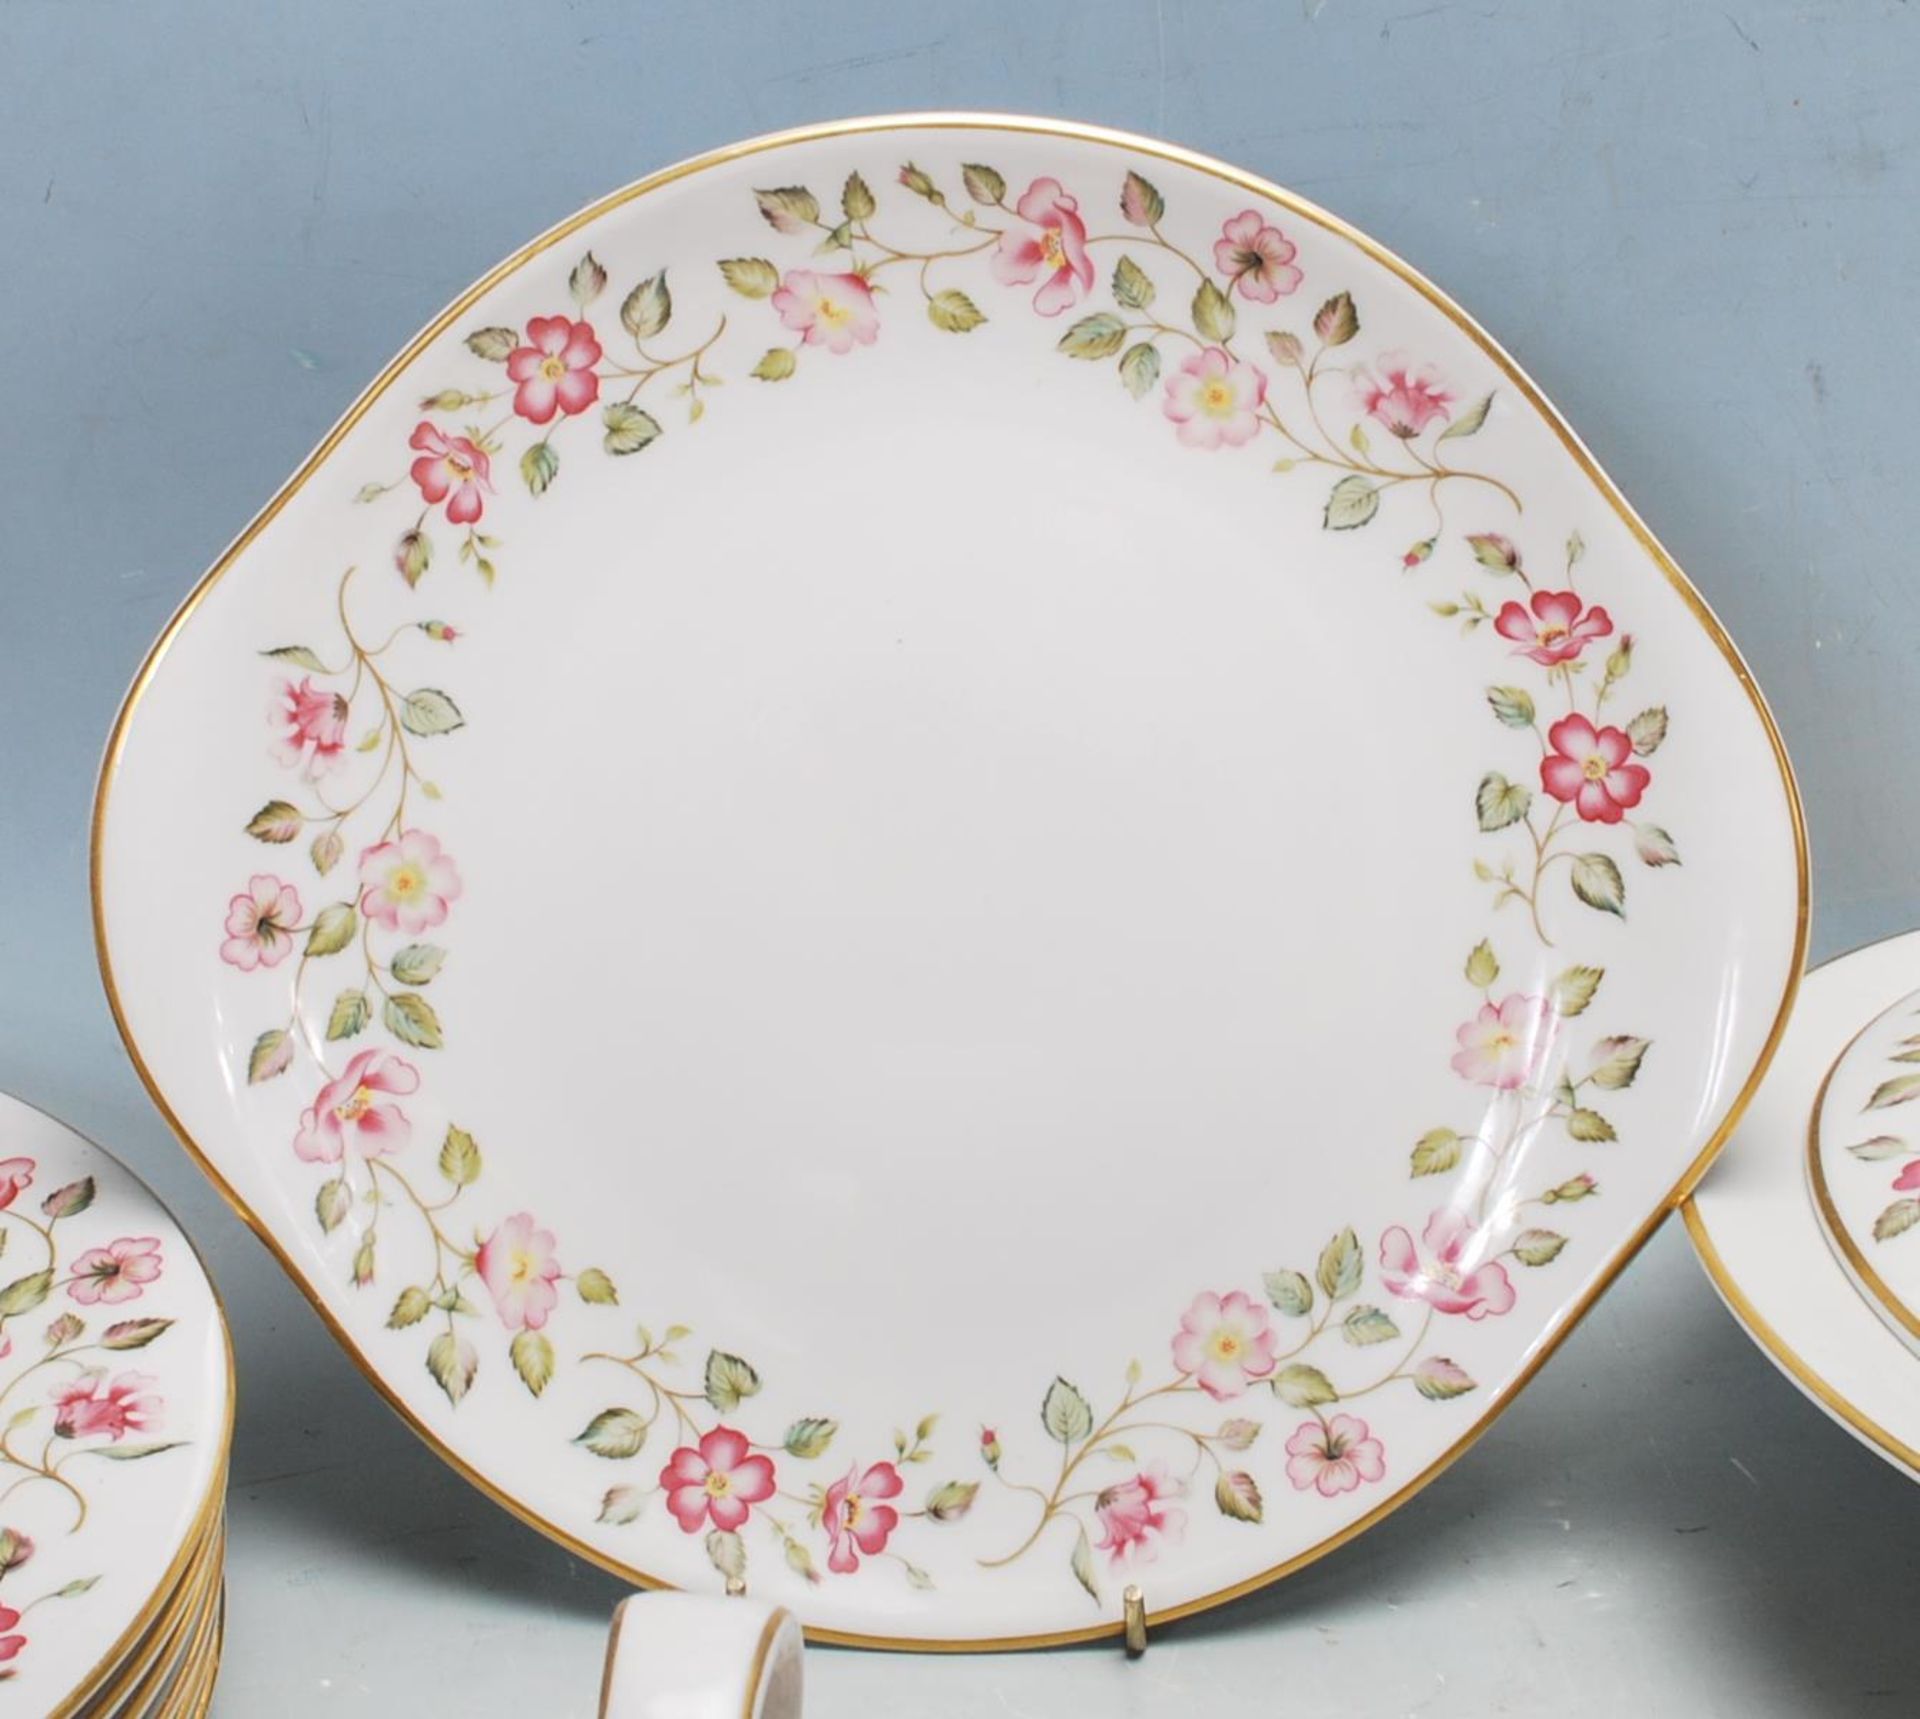 VINTAGE MID 20TH CENTURY ROYAL DOULTON WOODLAND ROSE DINNER SERVIVE - Image 10 of 11